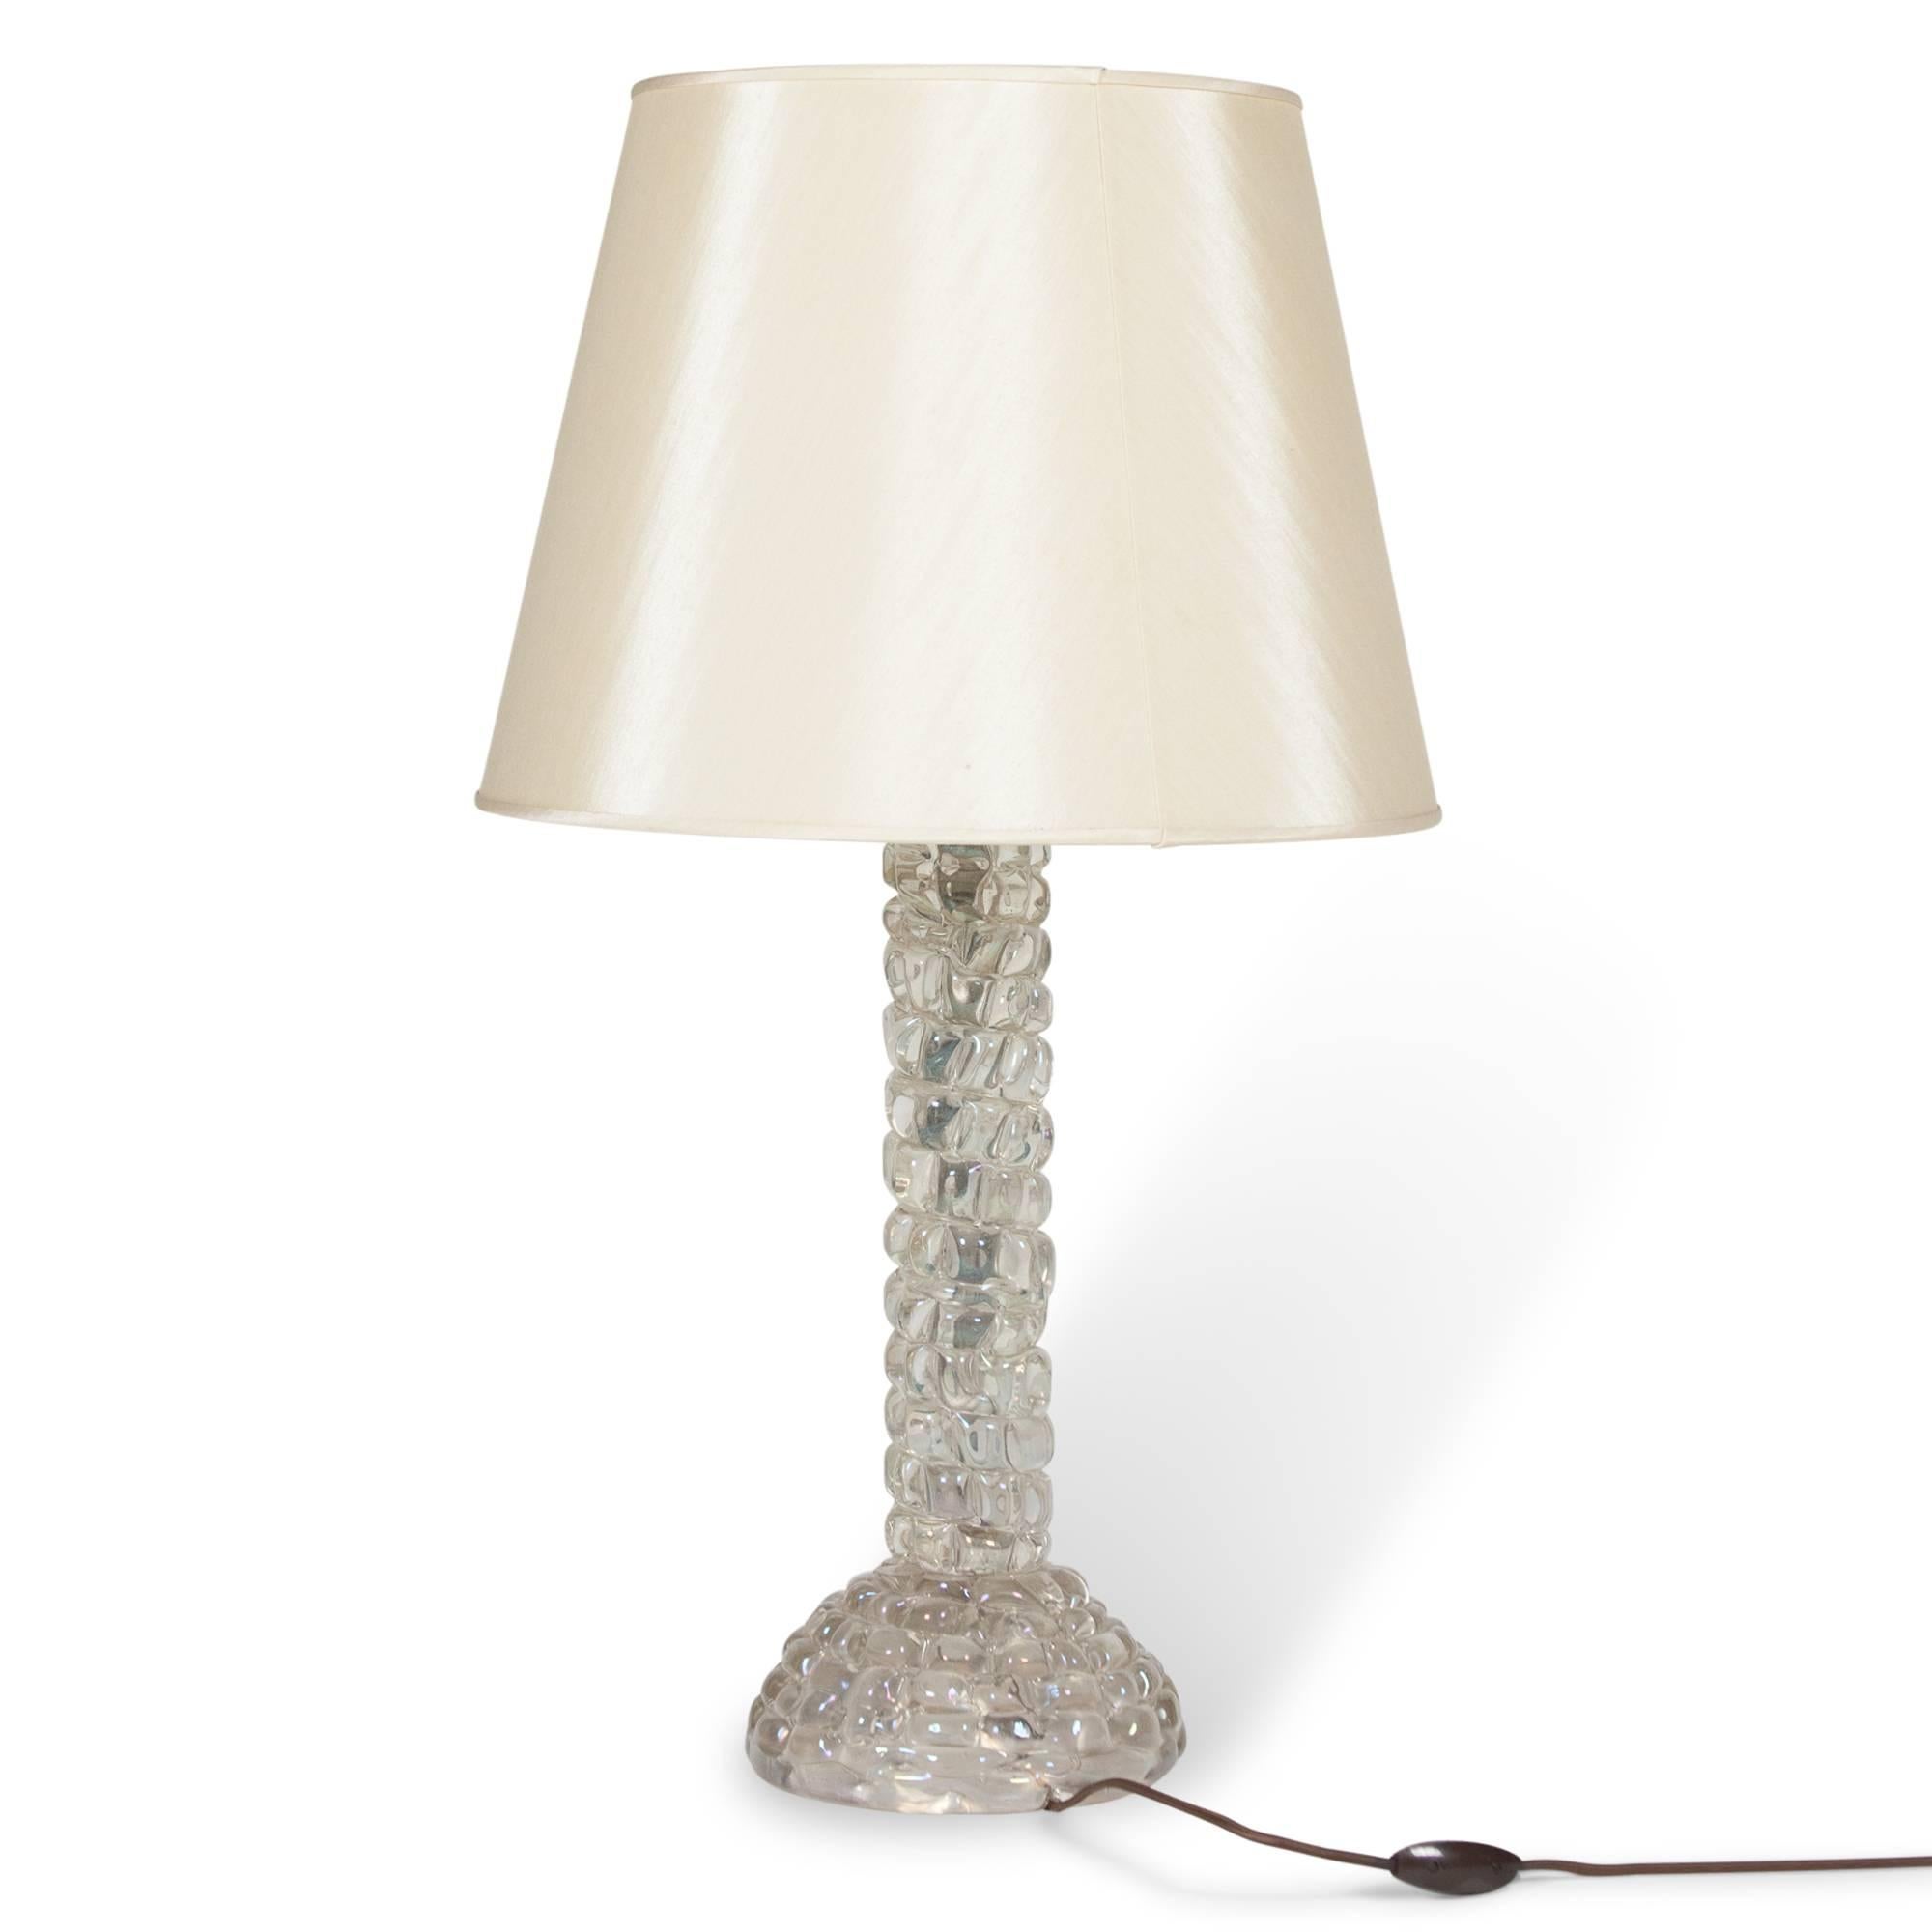 Glass table lamp, clear glass with gold inclusions, of simple column-form with rounded base and textured on the surface with raised squares, by Barovier e Toso, Italian, 1940s. In a custom satin silk shade. Measures: 8 in. D base, 15.5 in. D shade